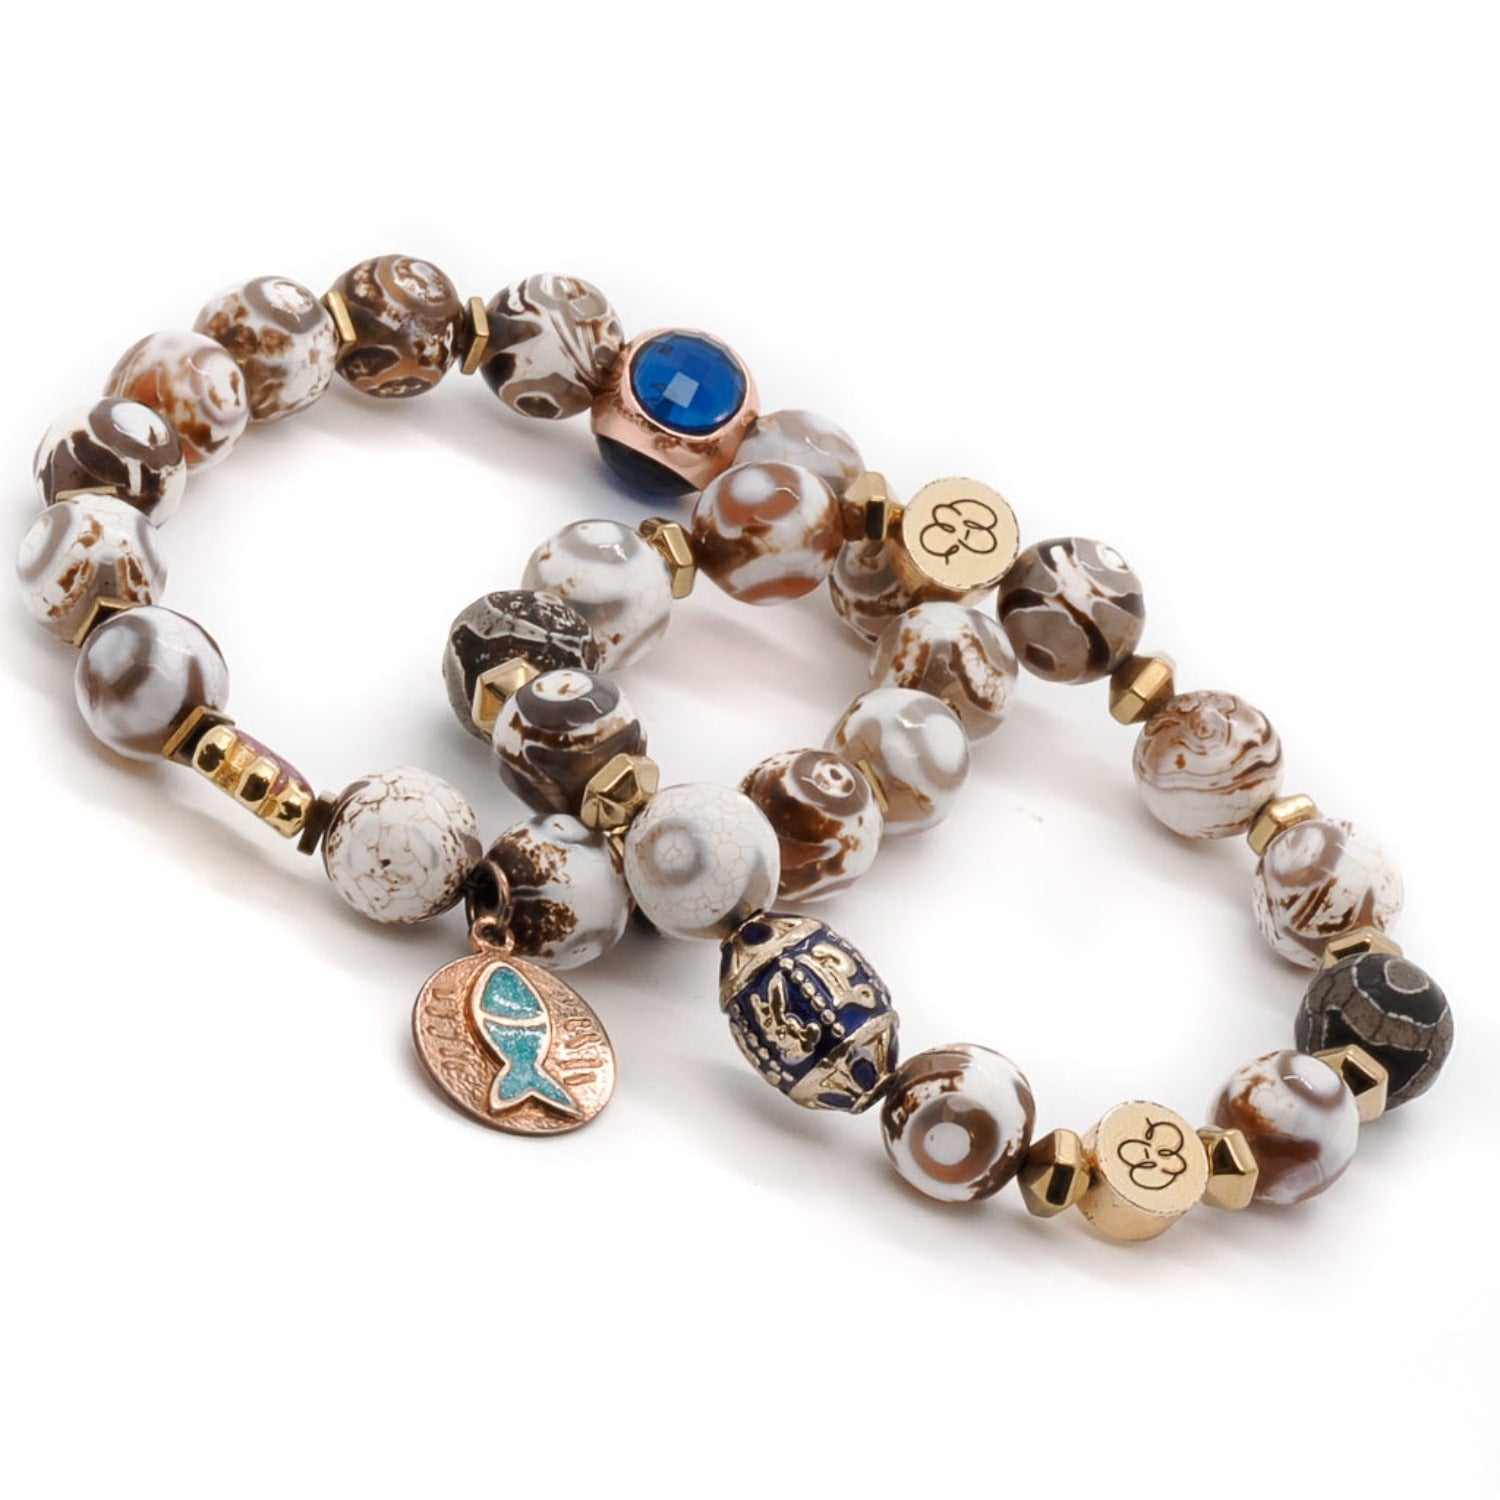 Discover the captivating beauty of the Lucky Fish Bracelet Set, handmade with Tibetan agate beads, gold hematite, and adorned with a gold-plated purple elephant and a sterling silver on gold-plated blue enamel fish charm.